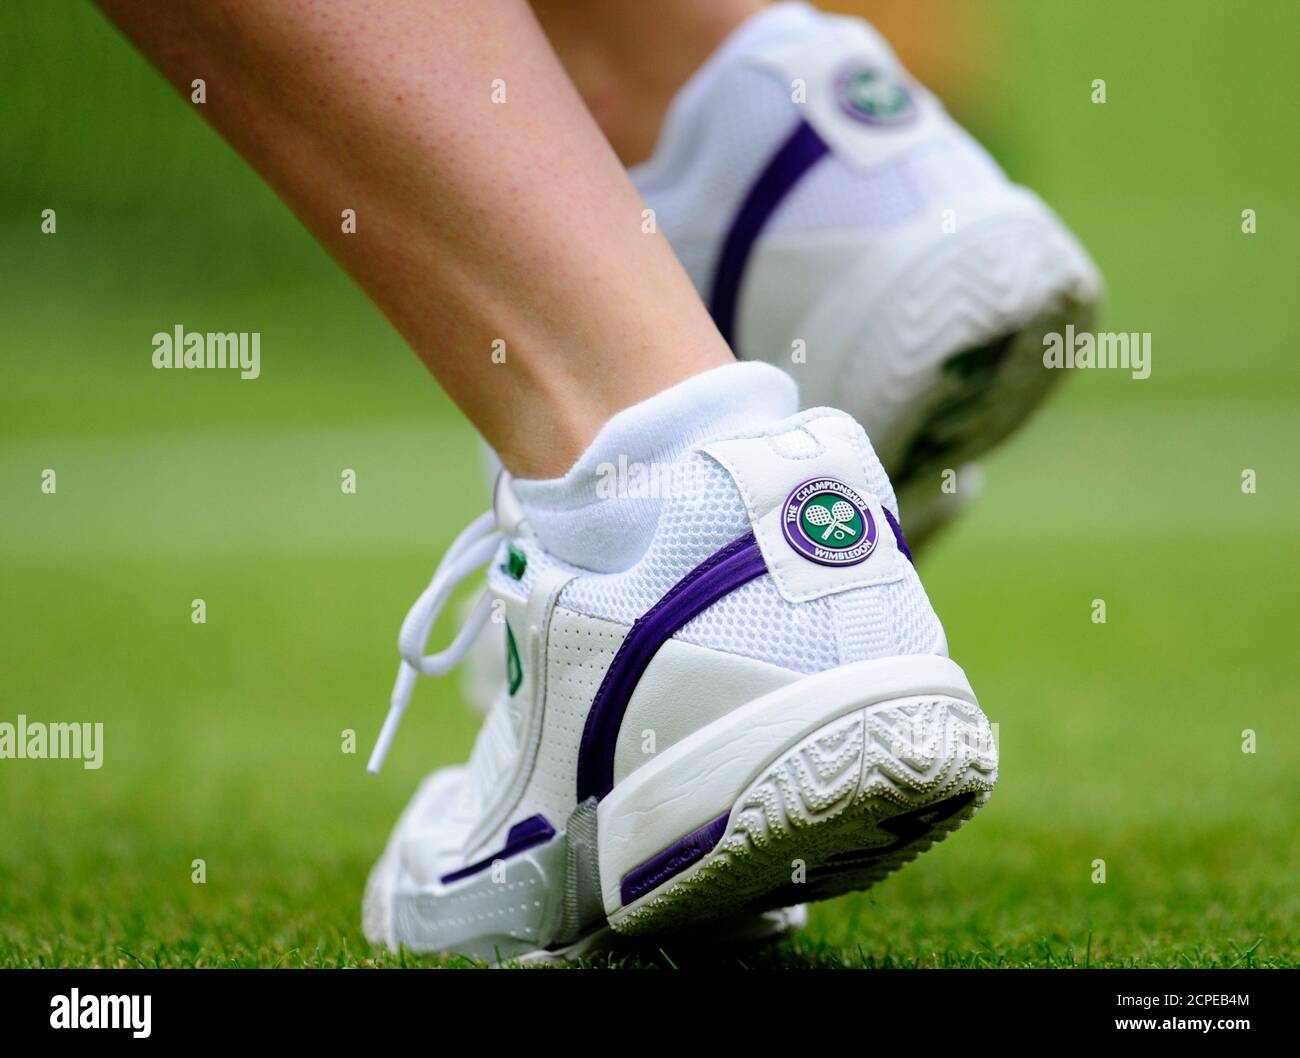 The shoes of ball girl are seen during the match between Maria Sharapova of  Russia and Viktoriya Kutuzova of Ukraine at the Wimbledon tennis  championships, in London June 22, 2009. REUTERS/Toby Melville (